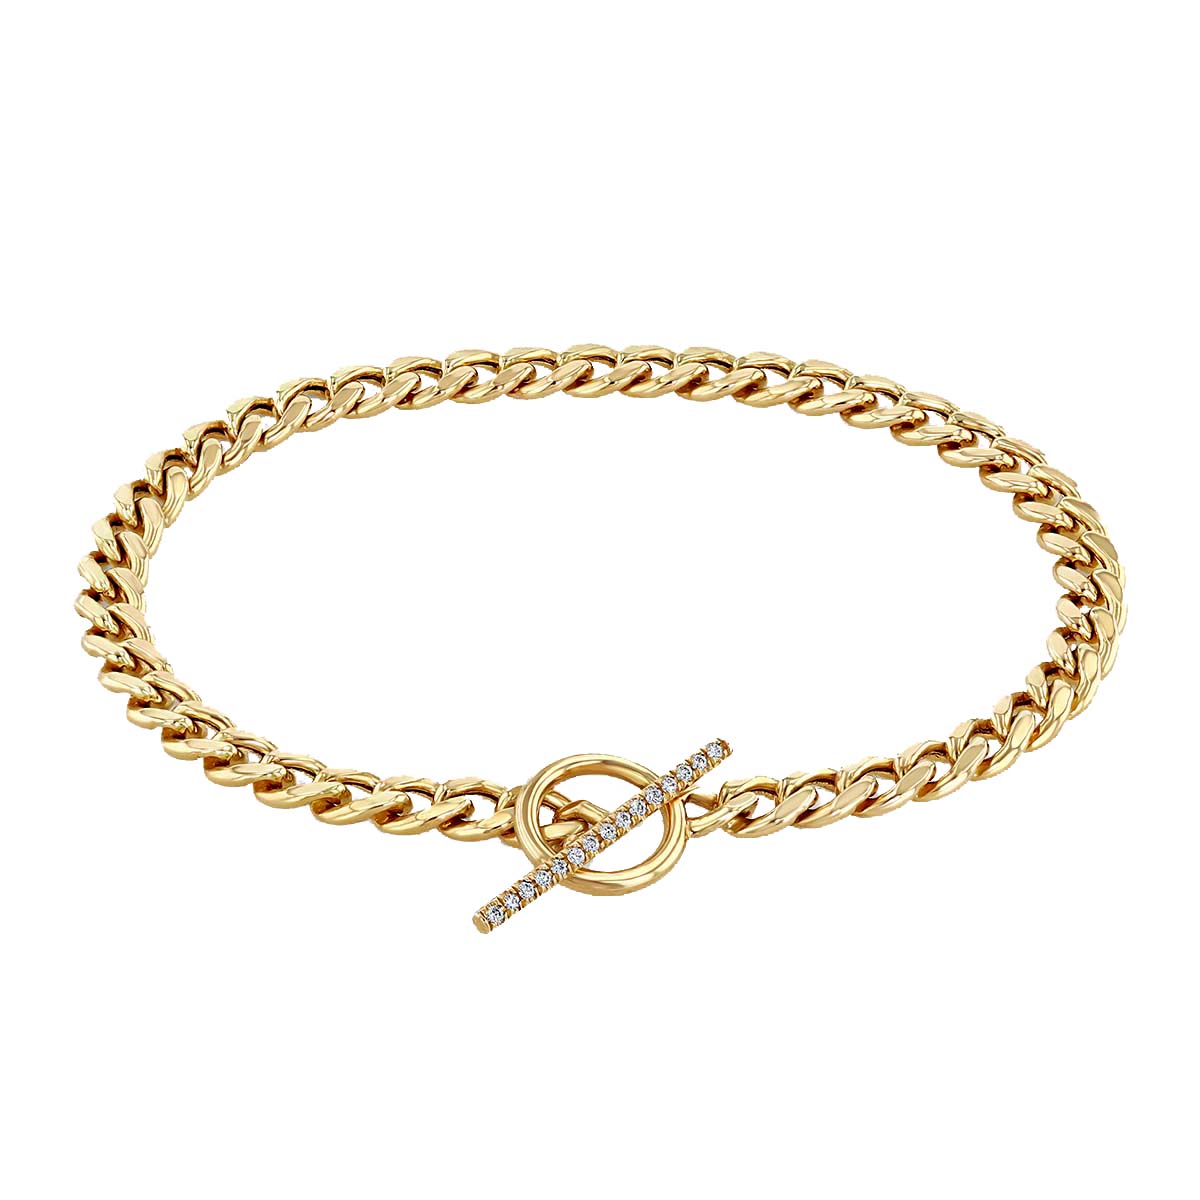 Zoe Chicco Yellow Gold Medium Curb Chain Bracelet with Pave Diamond Toggle